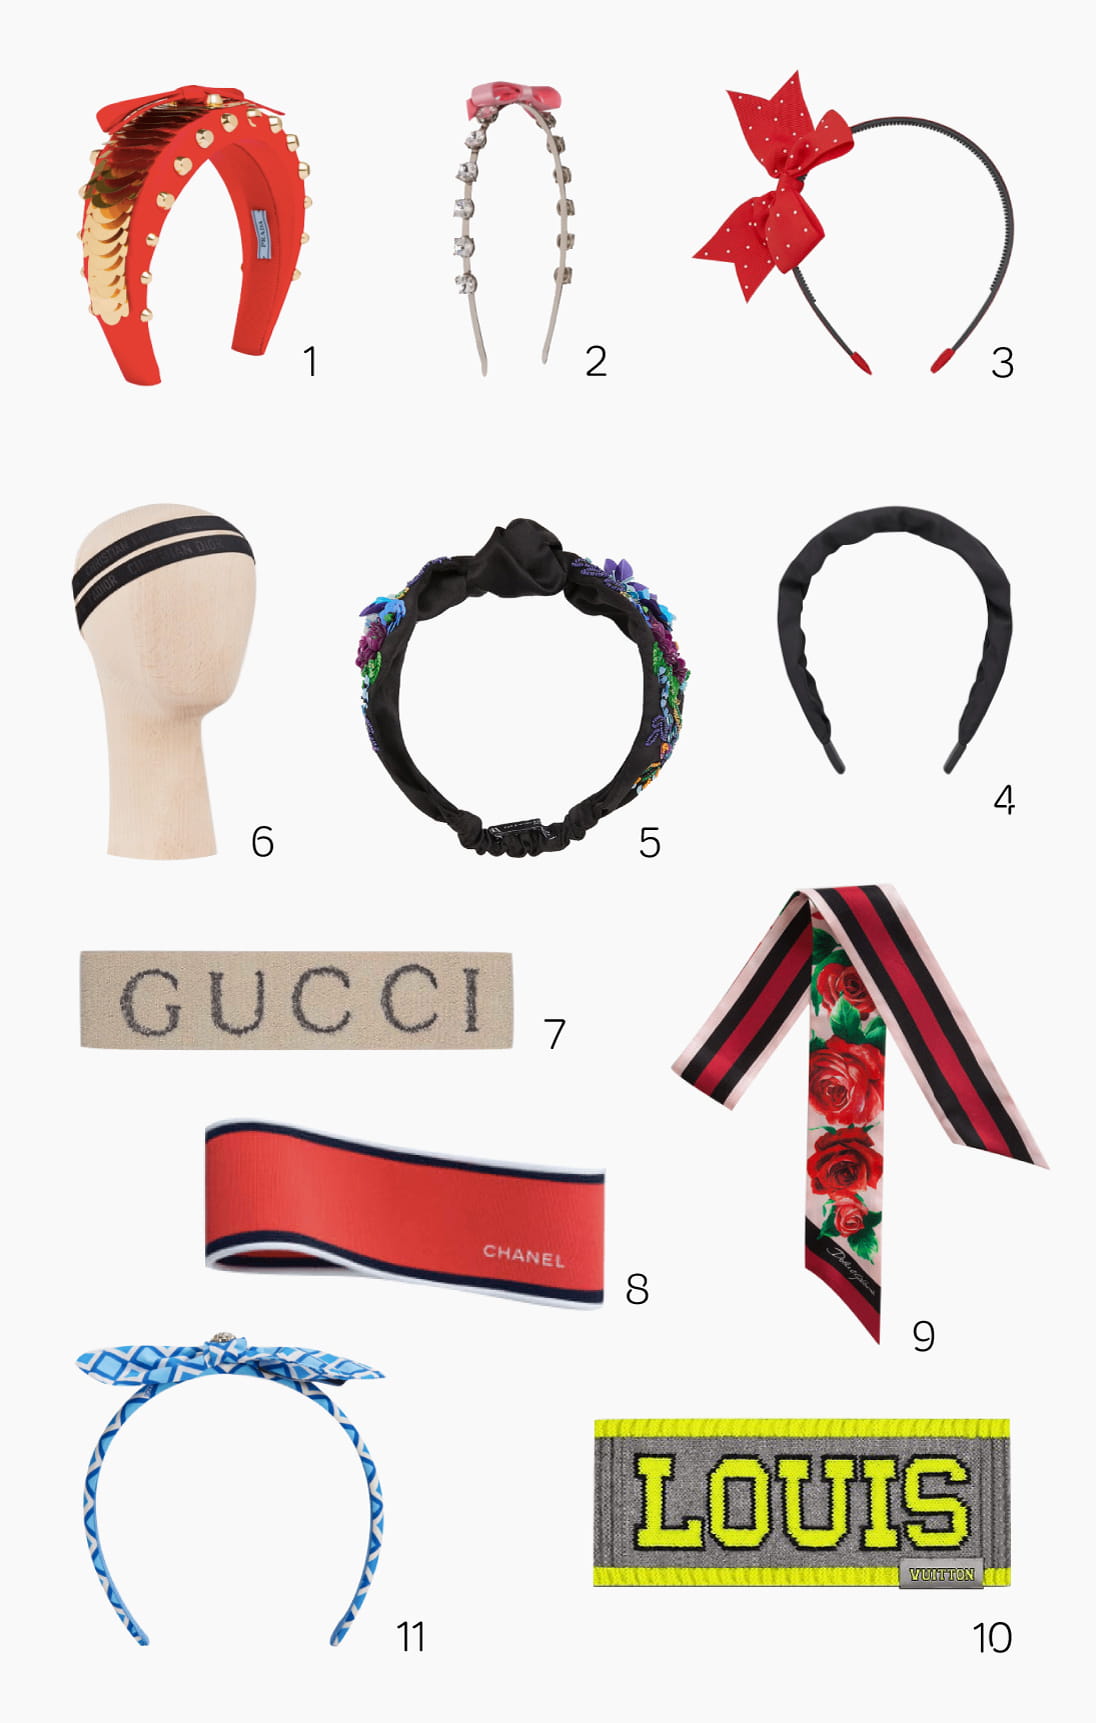 The headband trend has continued its upwards trajectory, diversifying to suit every taste